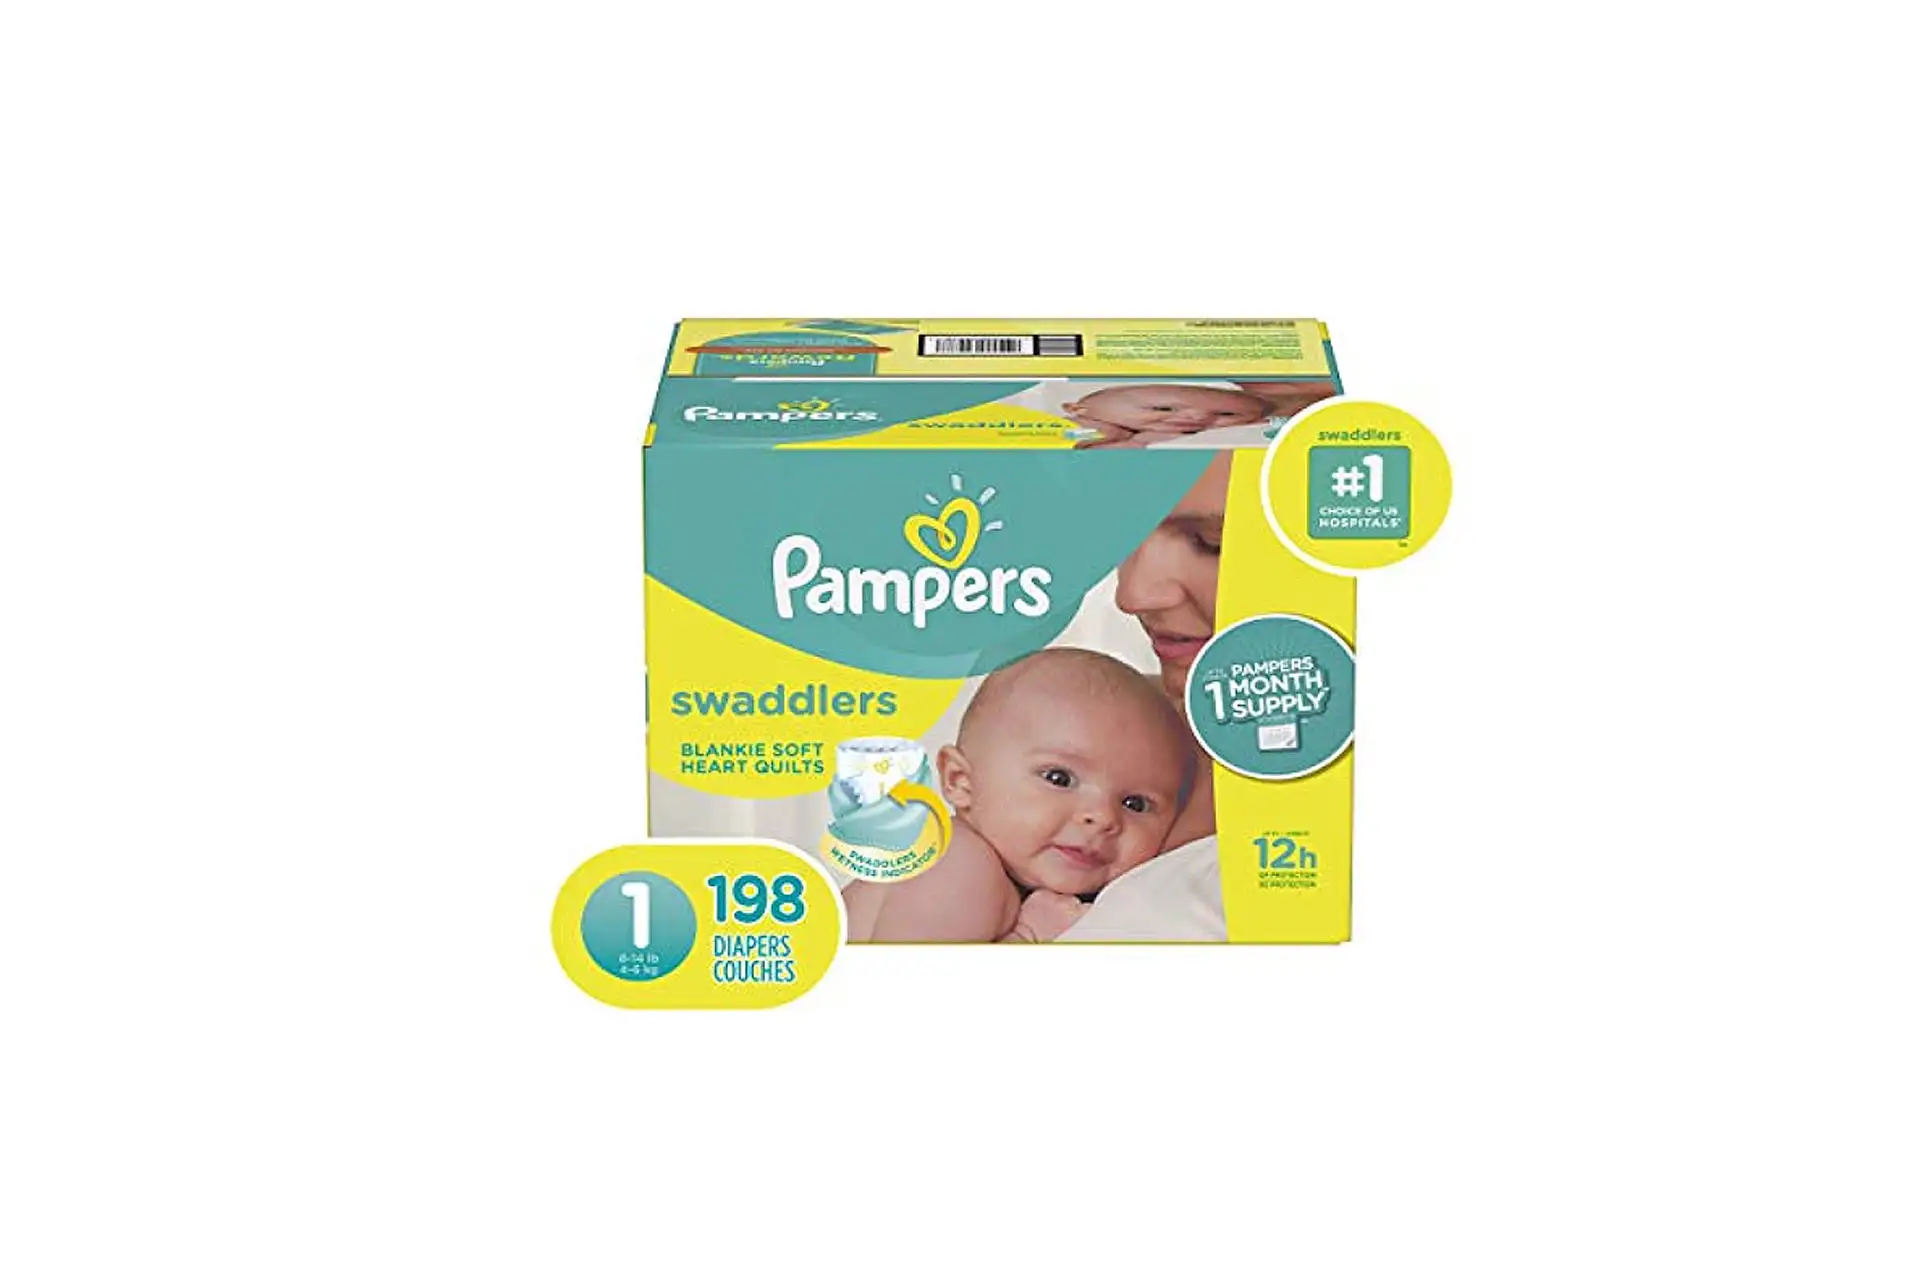 Pampers Diapers; Courtesy of Amazon